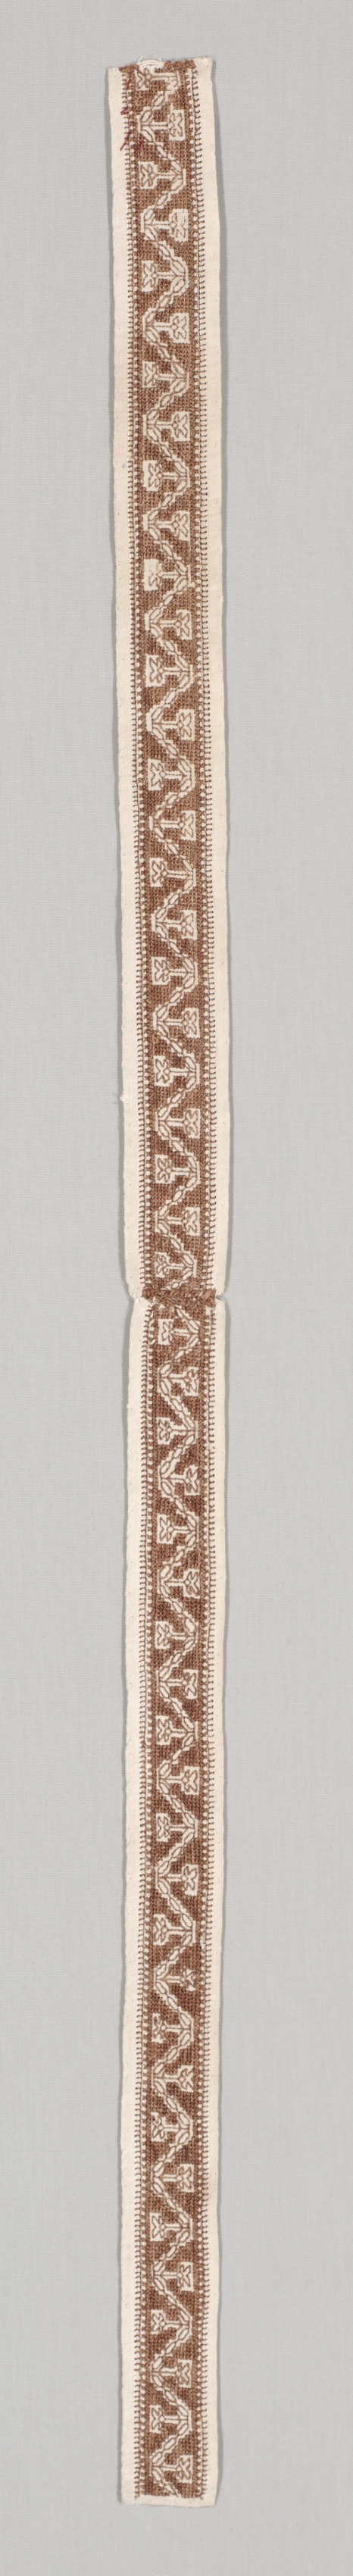 Embroidered Band